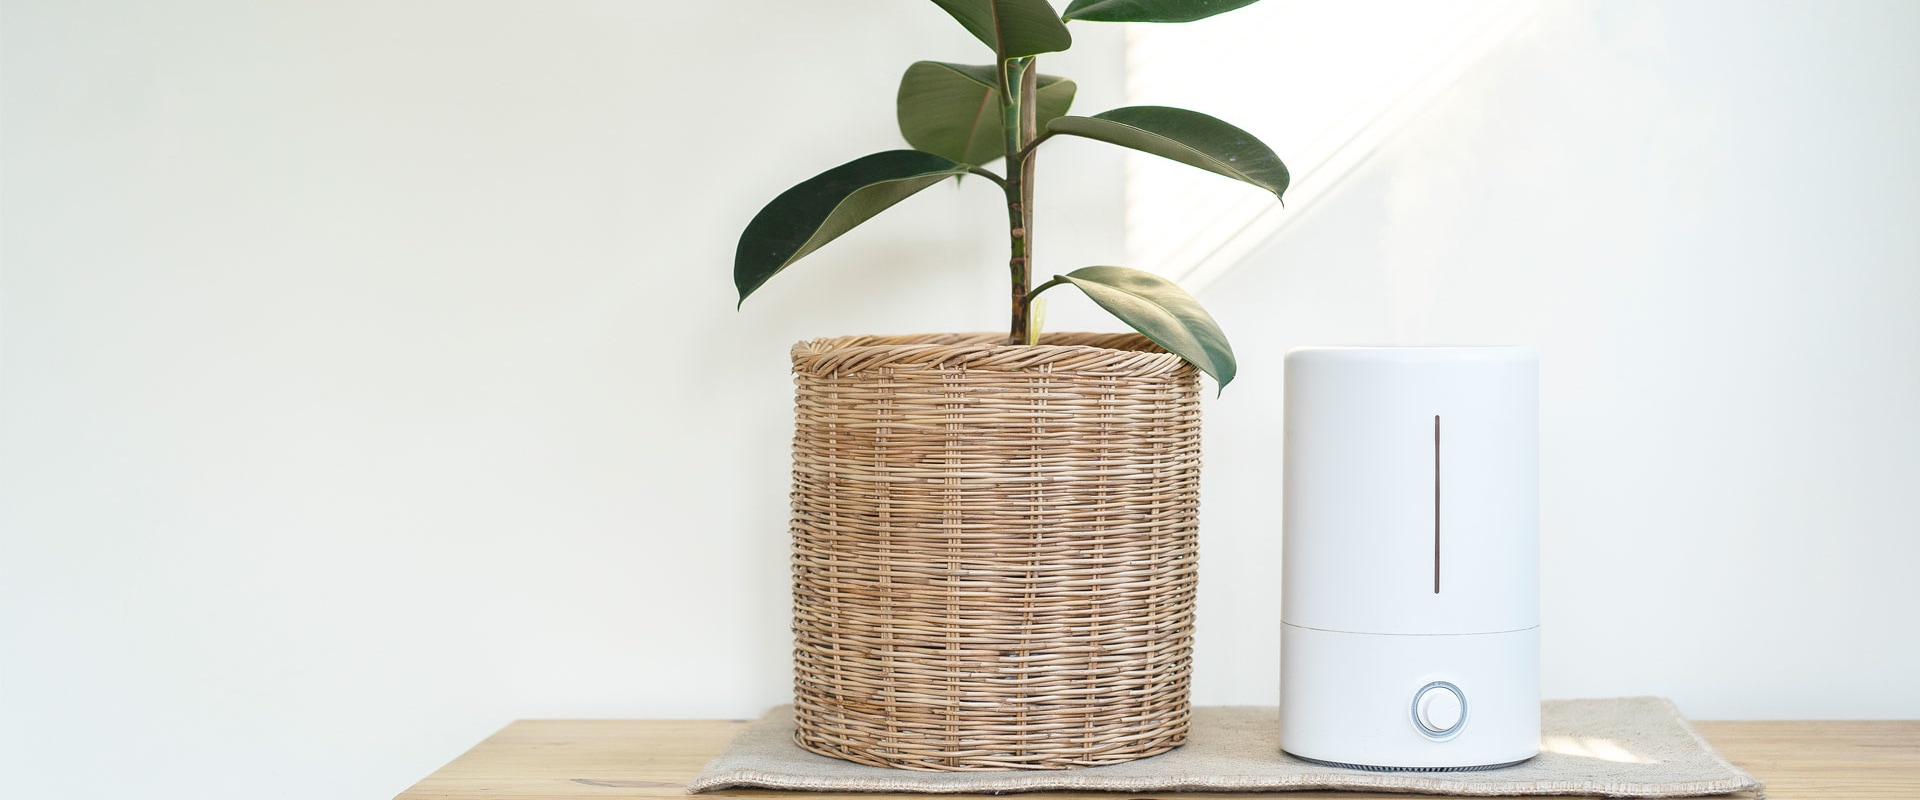 Hepa vs Ionic: Which Air Purifier is Better?